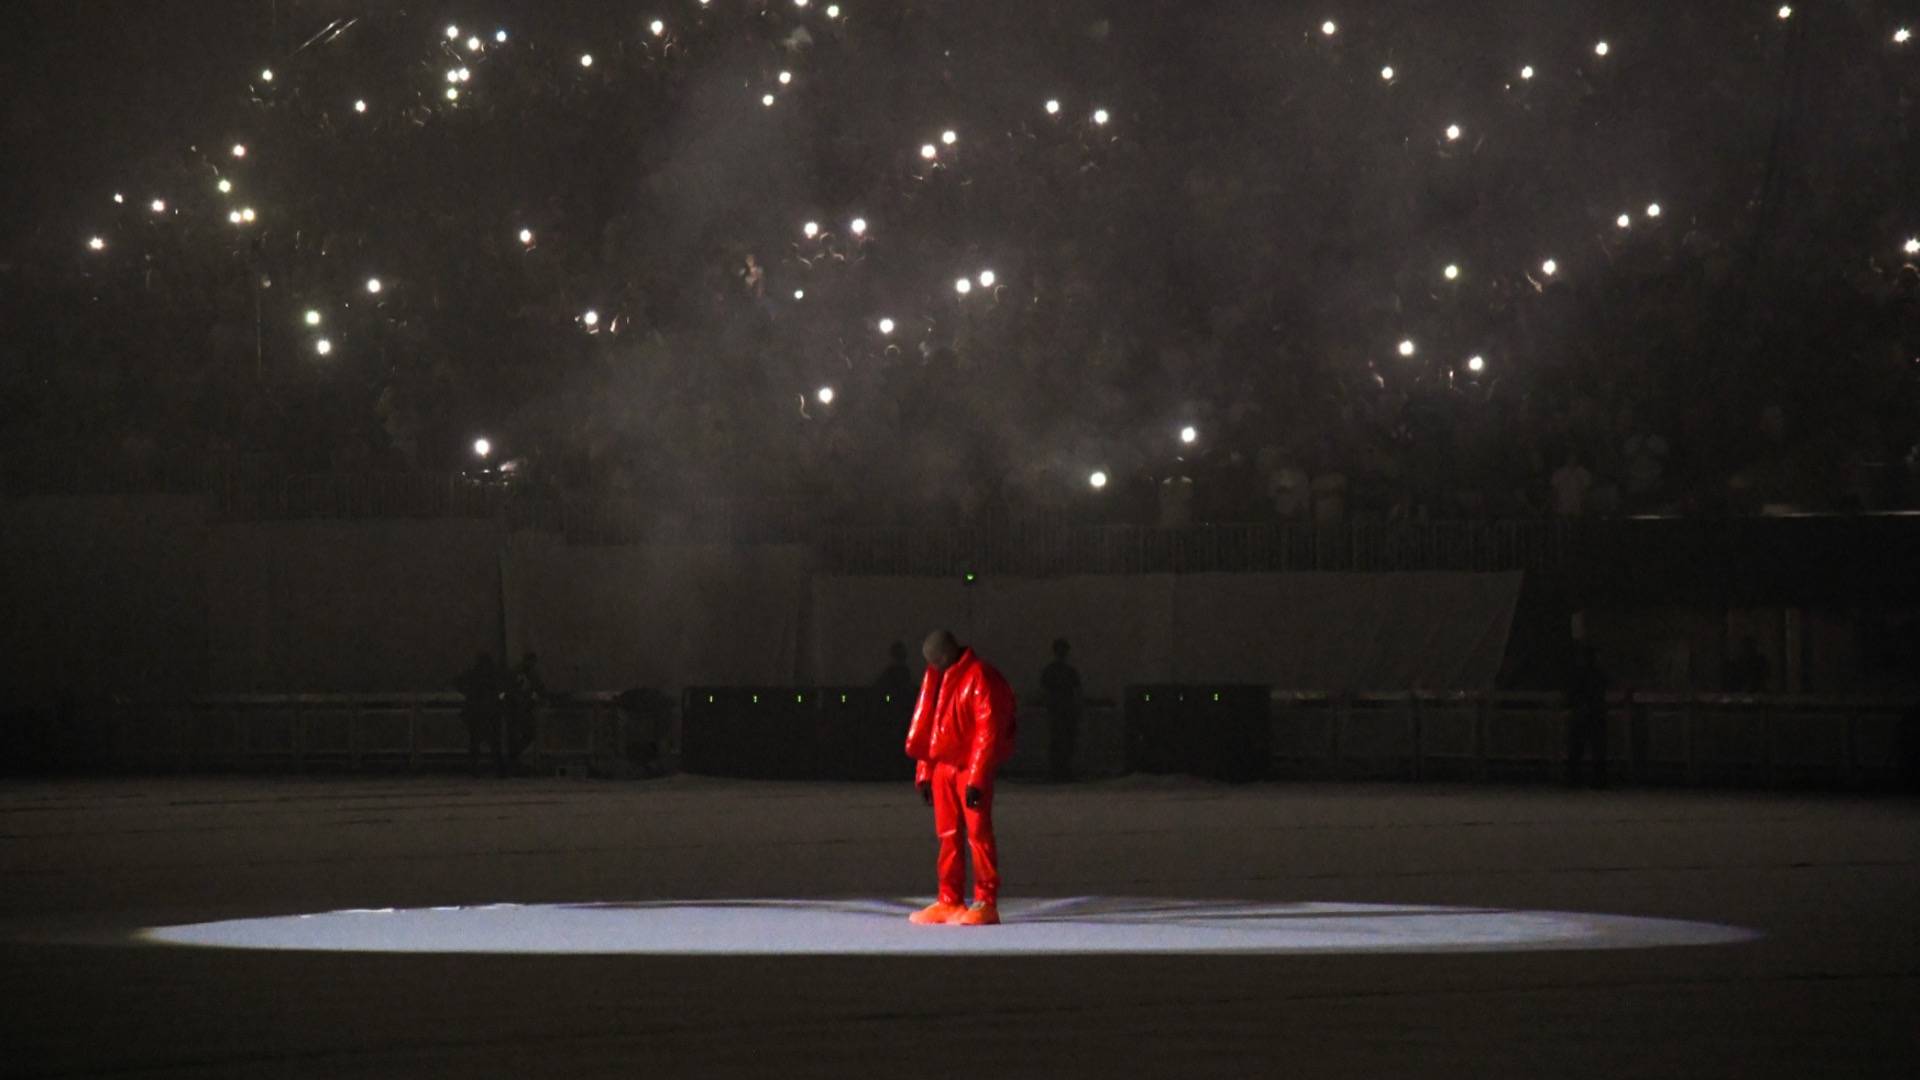 Kanye West in mask and red outfit on stage at DONDA listening party, with lights from the audience visible overhead